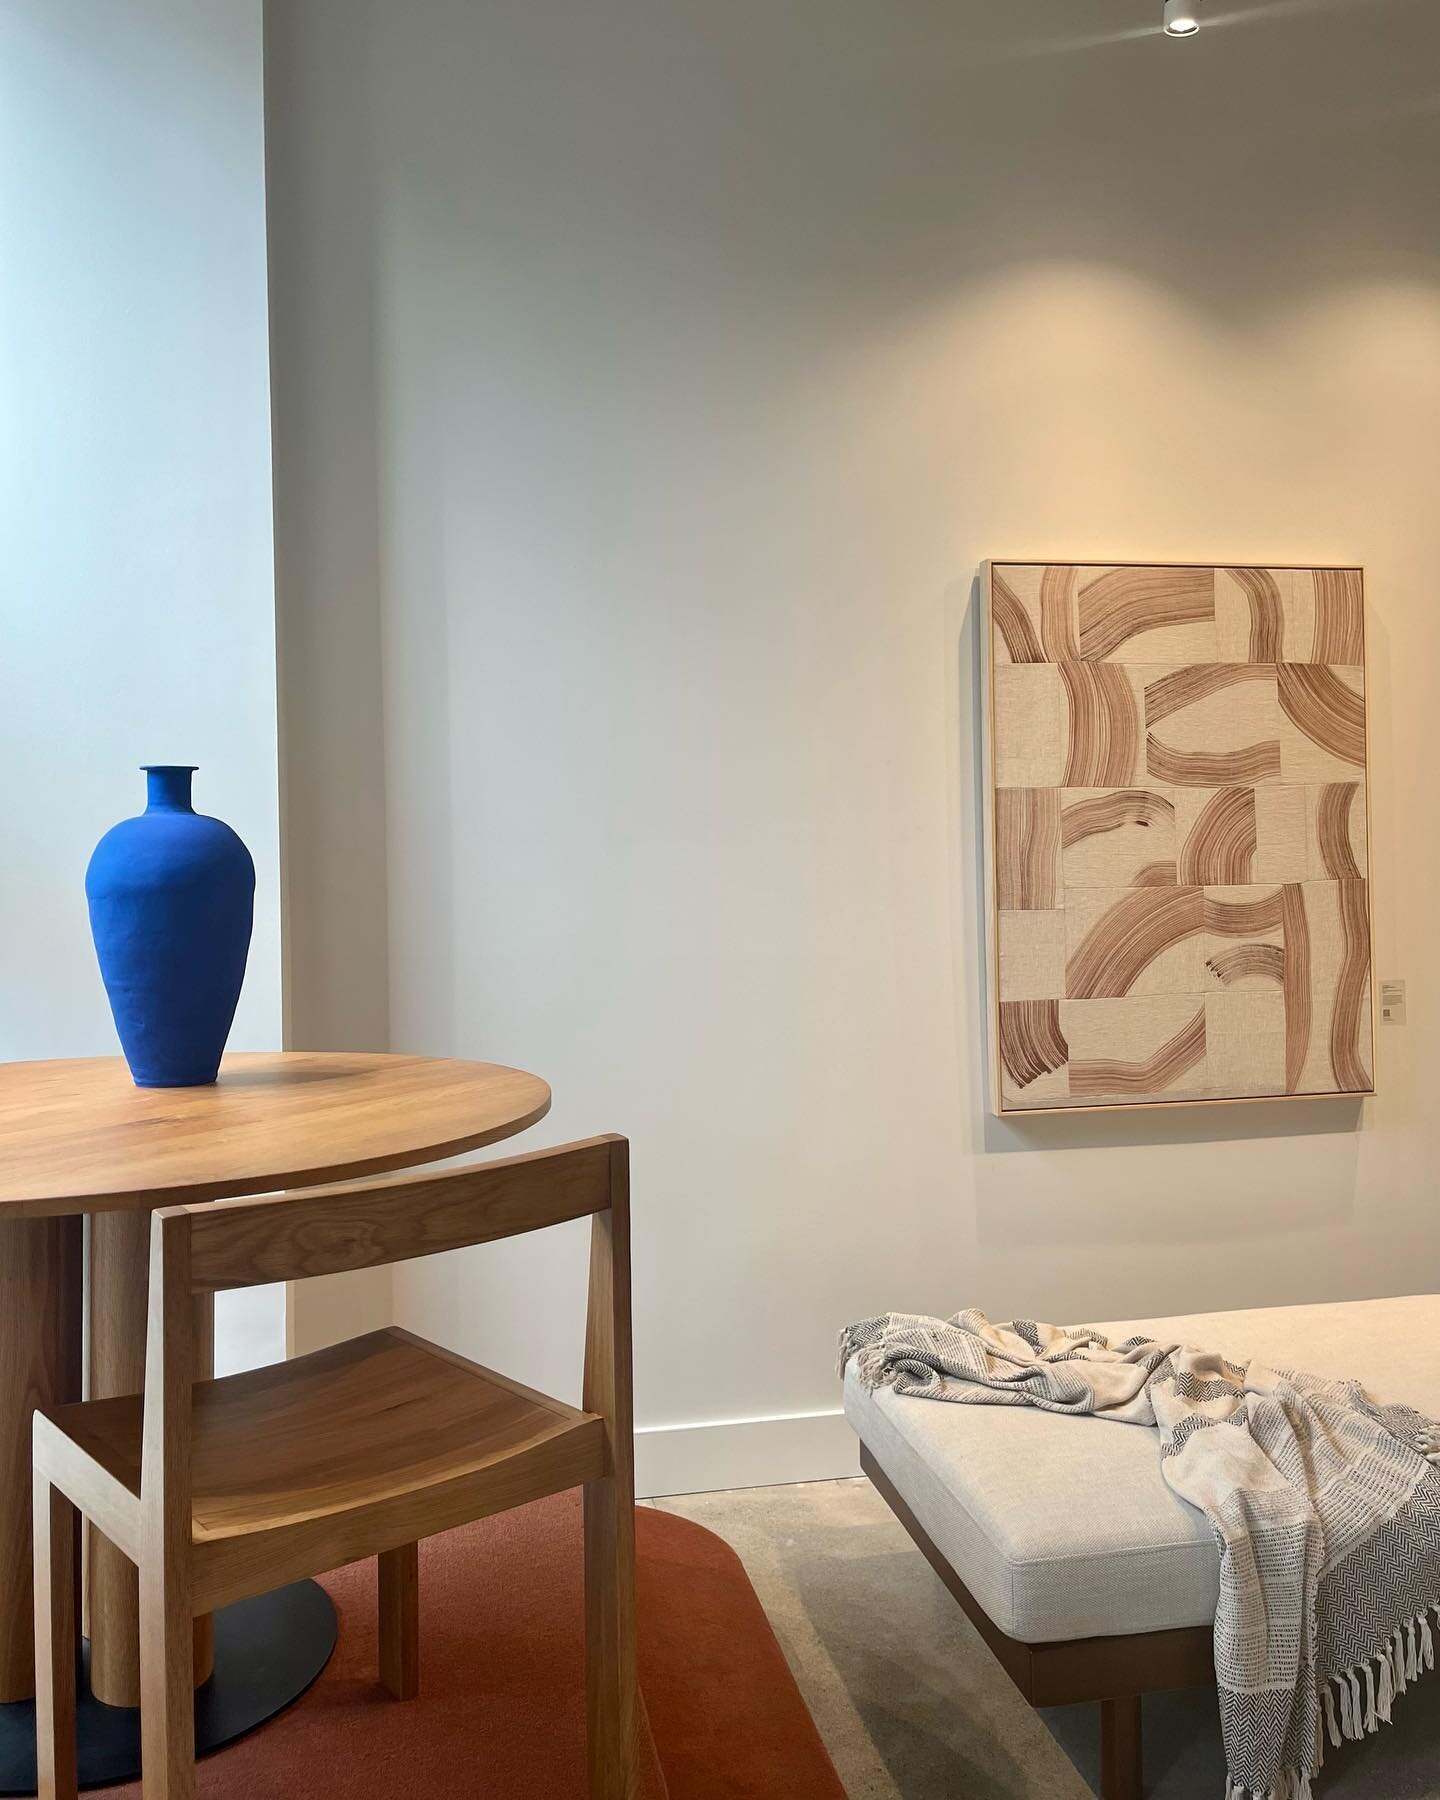 Madawaska River Drive, linen series painting 36&rdquo;x48&rdquo; on view @sundaysfurniture along with stunning blue vases by @___solem 

The rust brown and Yves Klein blue of the pottery really sing IMHO.

#arttoronto #torontoartist #textileart #coll